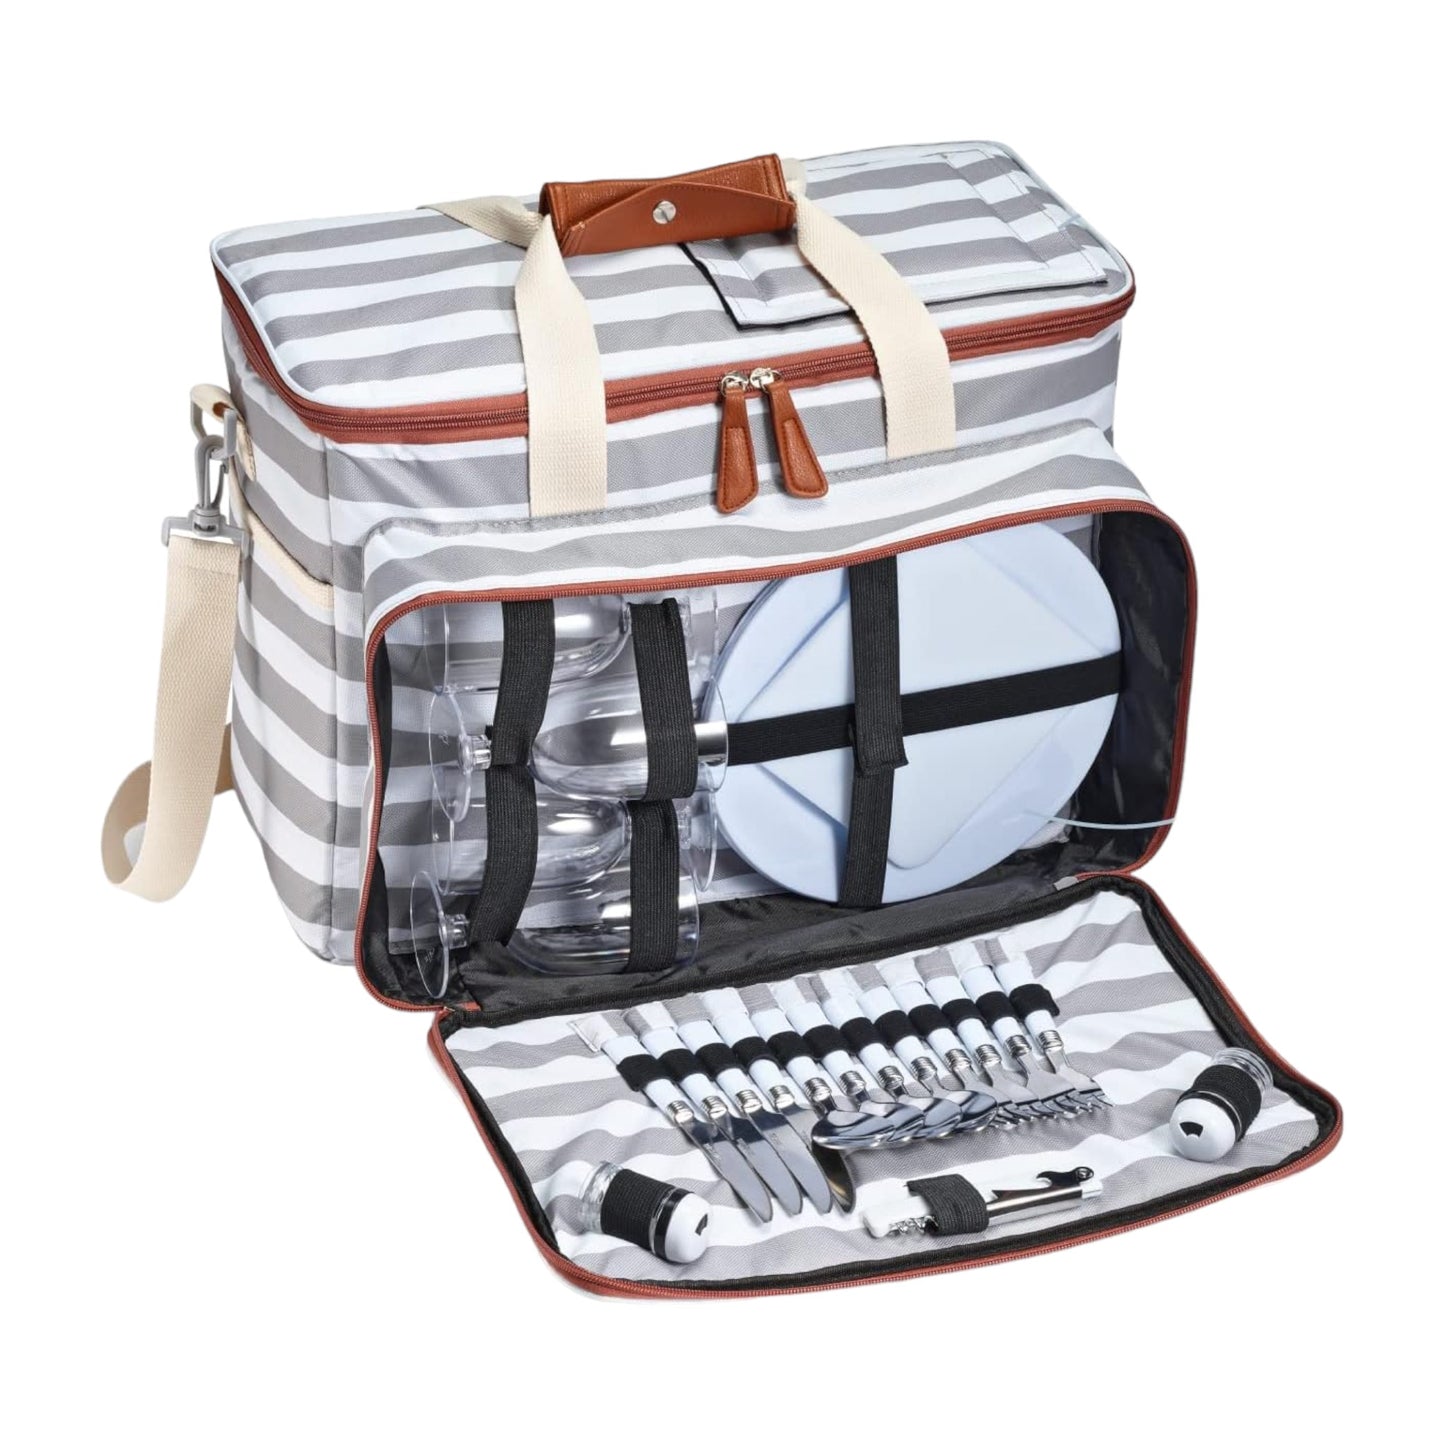 Ultimate Travel Companion: Foundry by Fit + Fresh Insulated Soft Cooler Bag - Complete Picnic Set Included! - Ricky's Garage